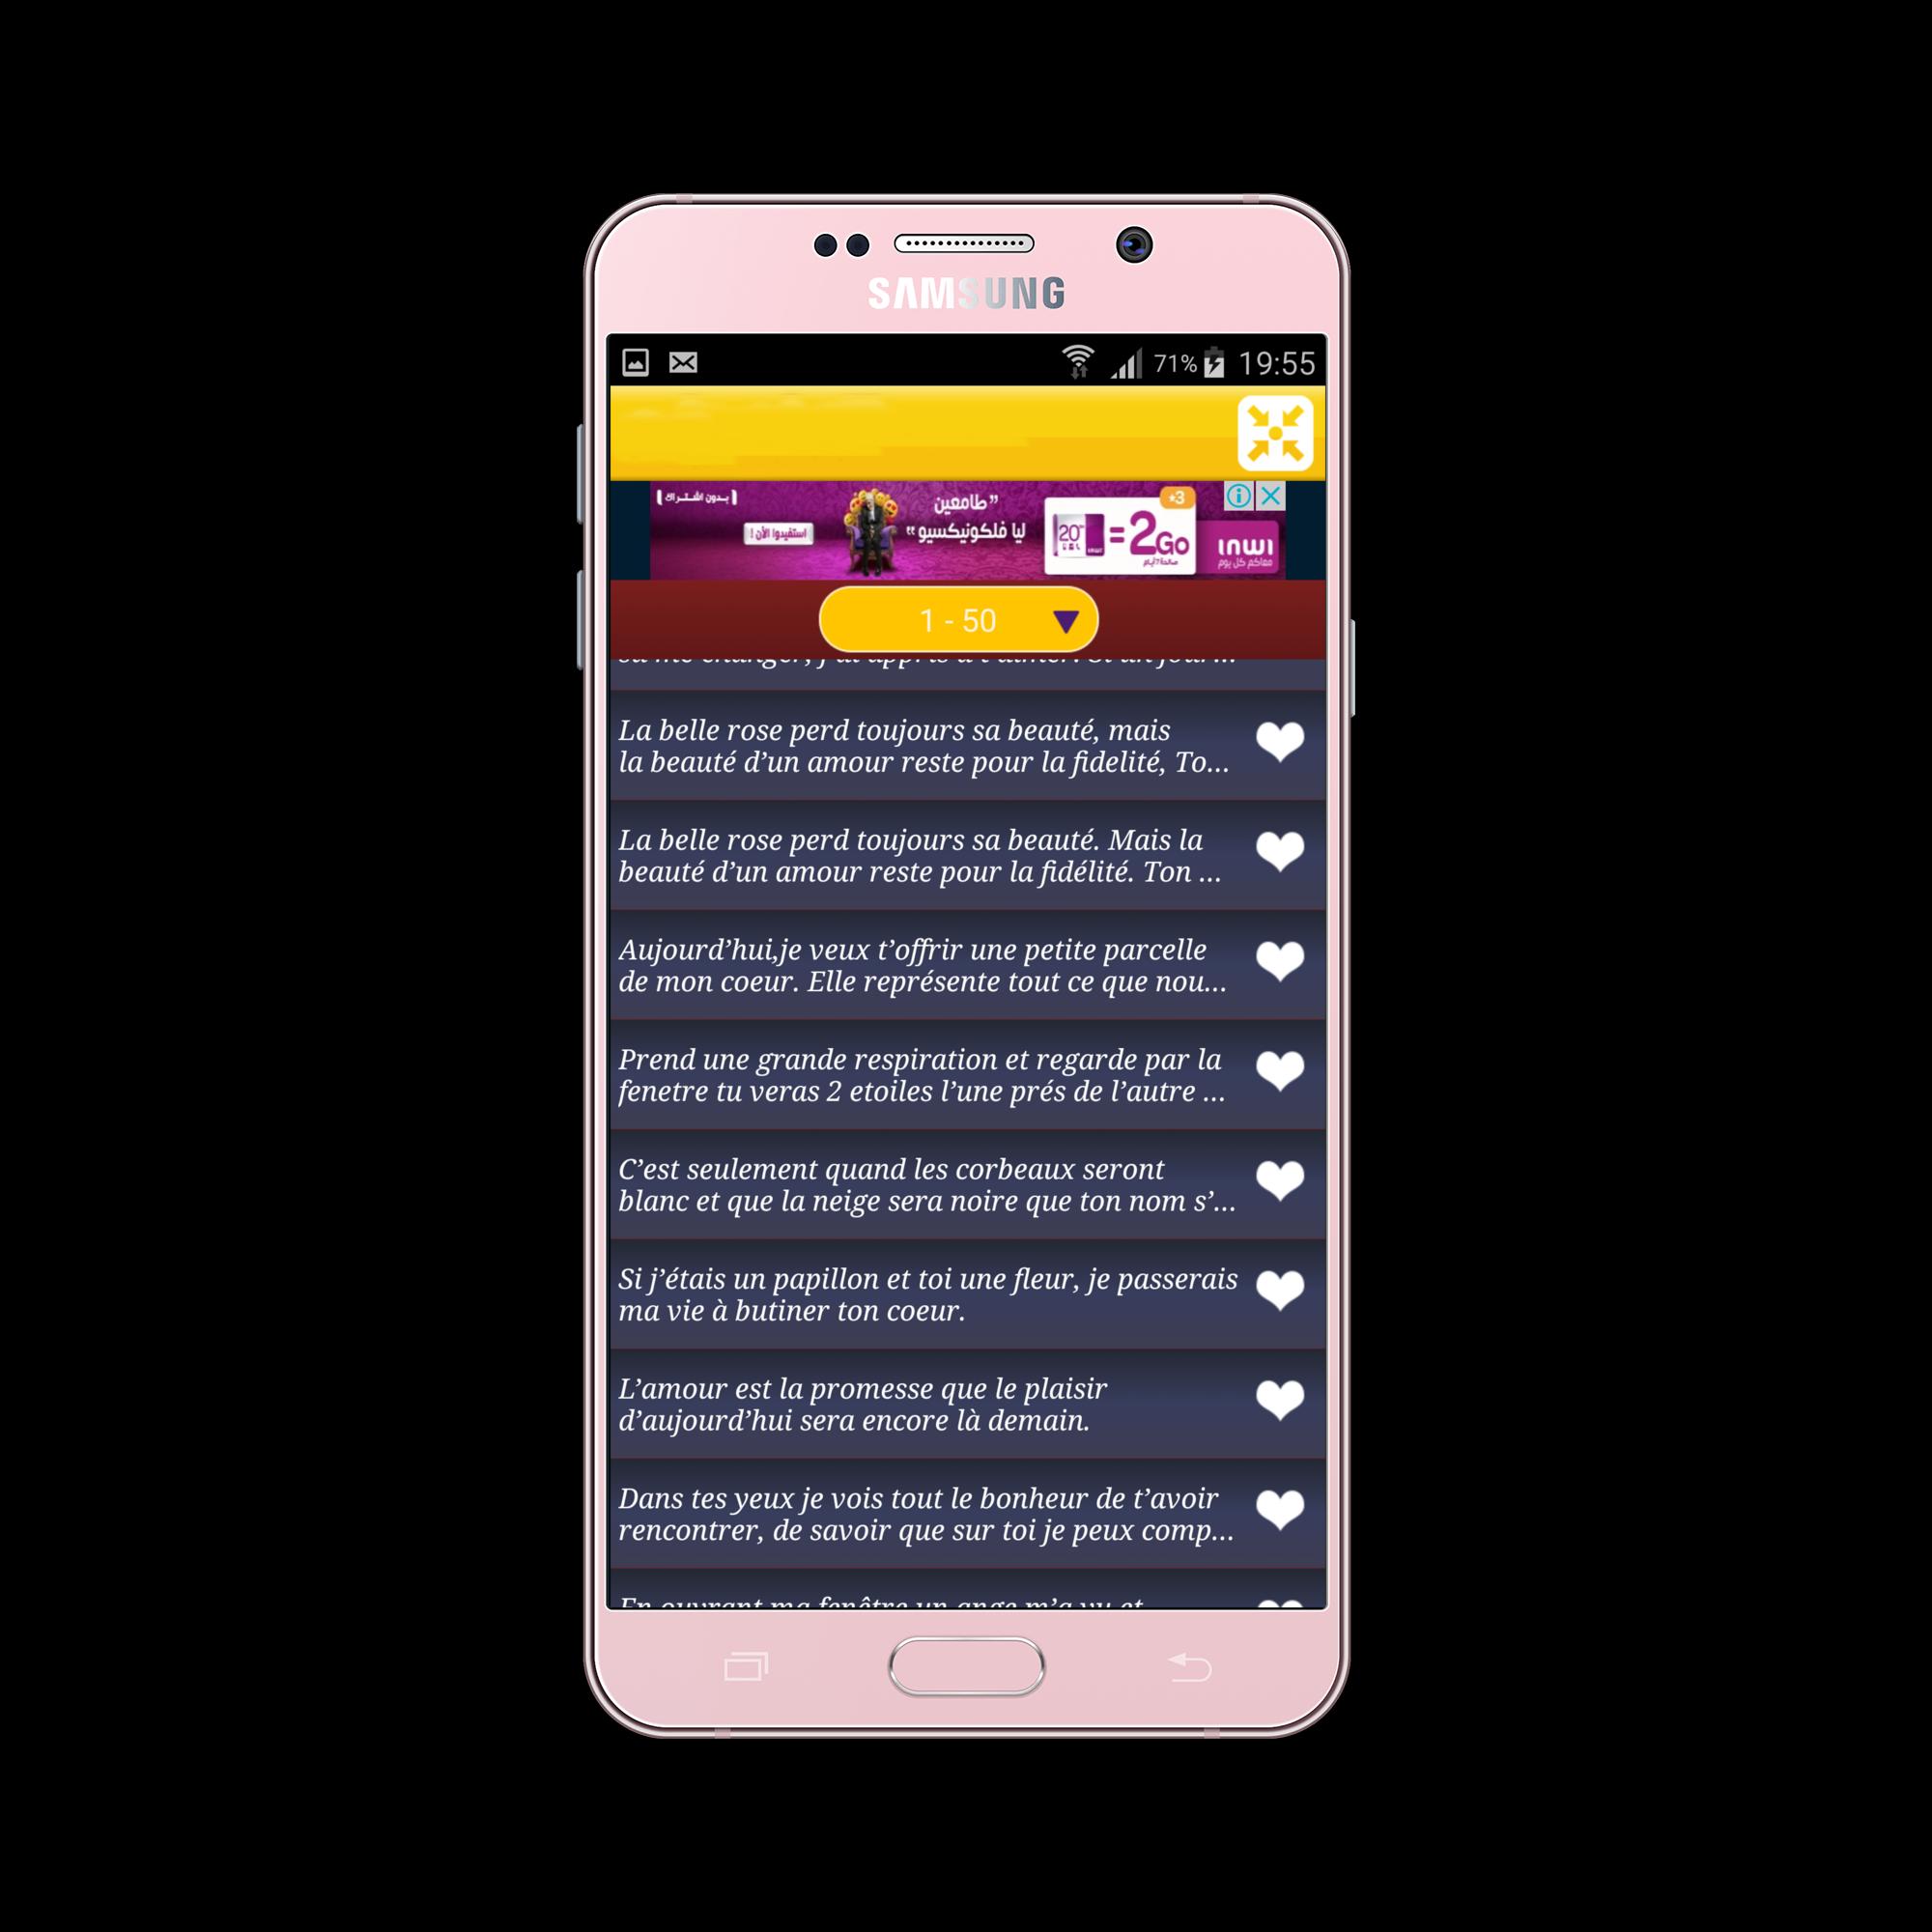 Sms Damour 2018 For Android Apk Download